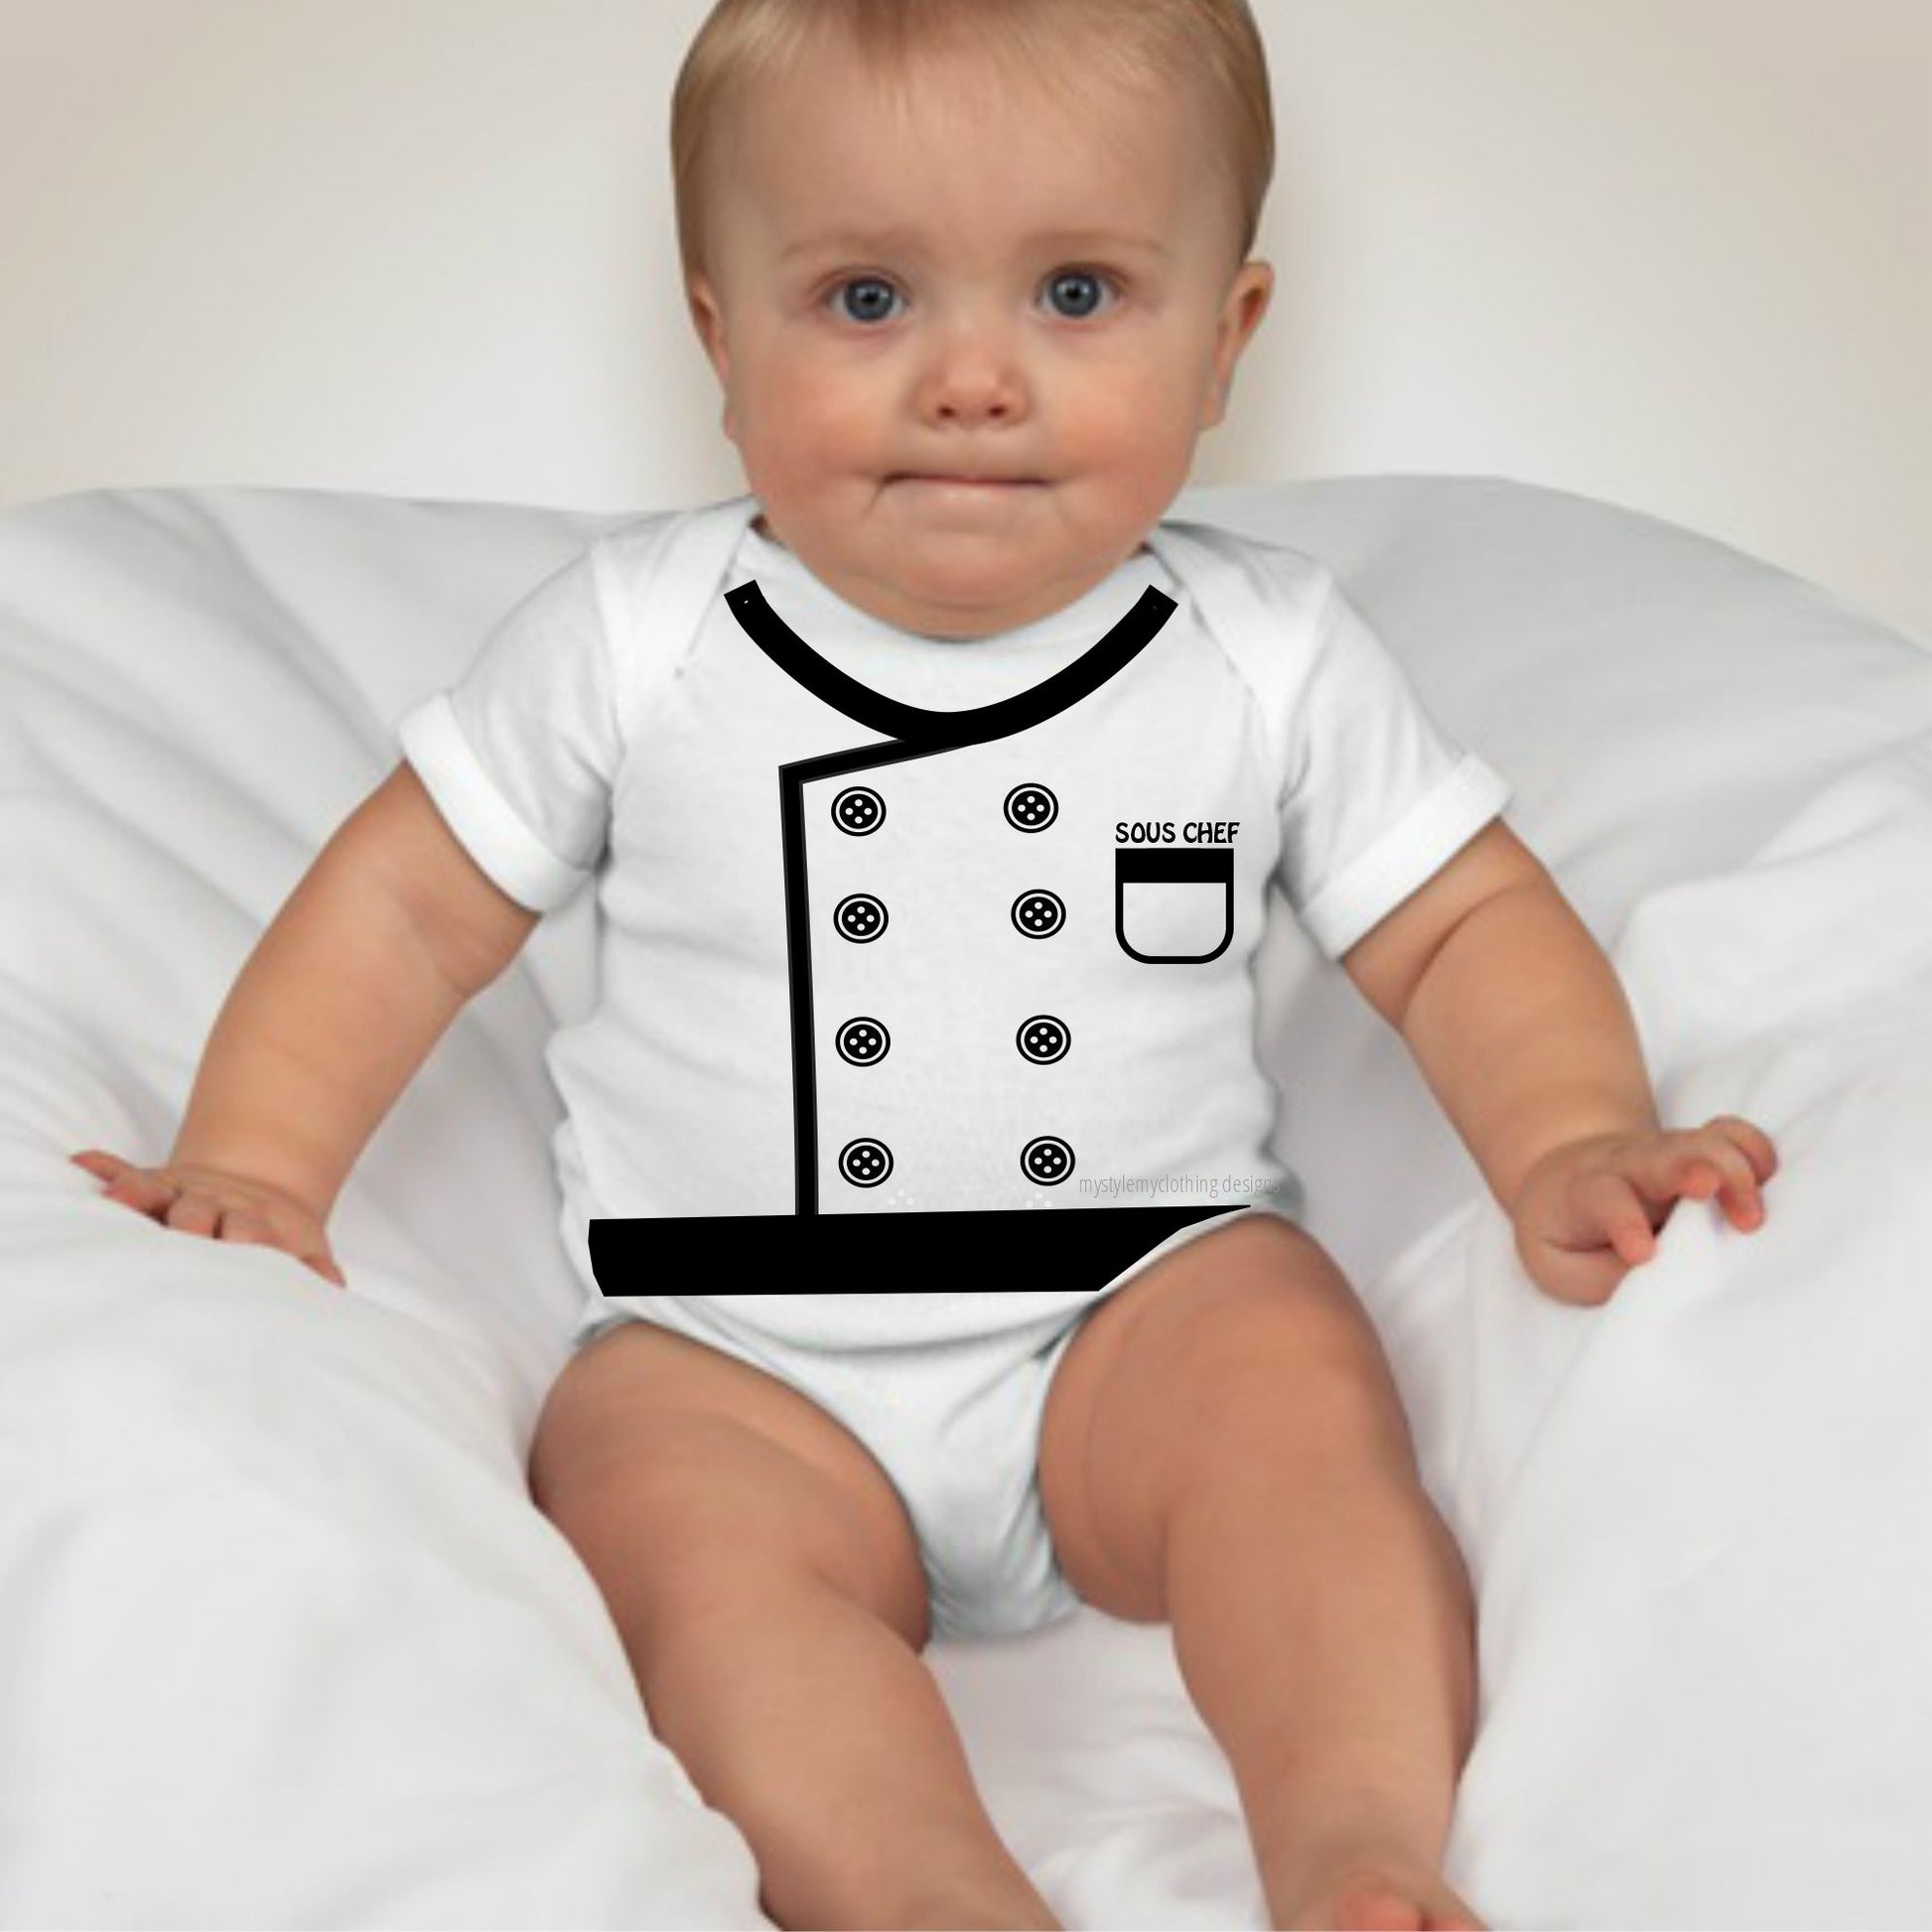 Baby Career Onesies -Sous Chef with FREE Name Print - MYSTYLEMYCLOTHING